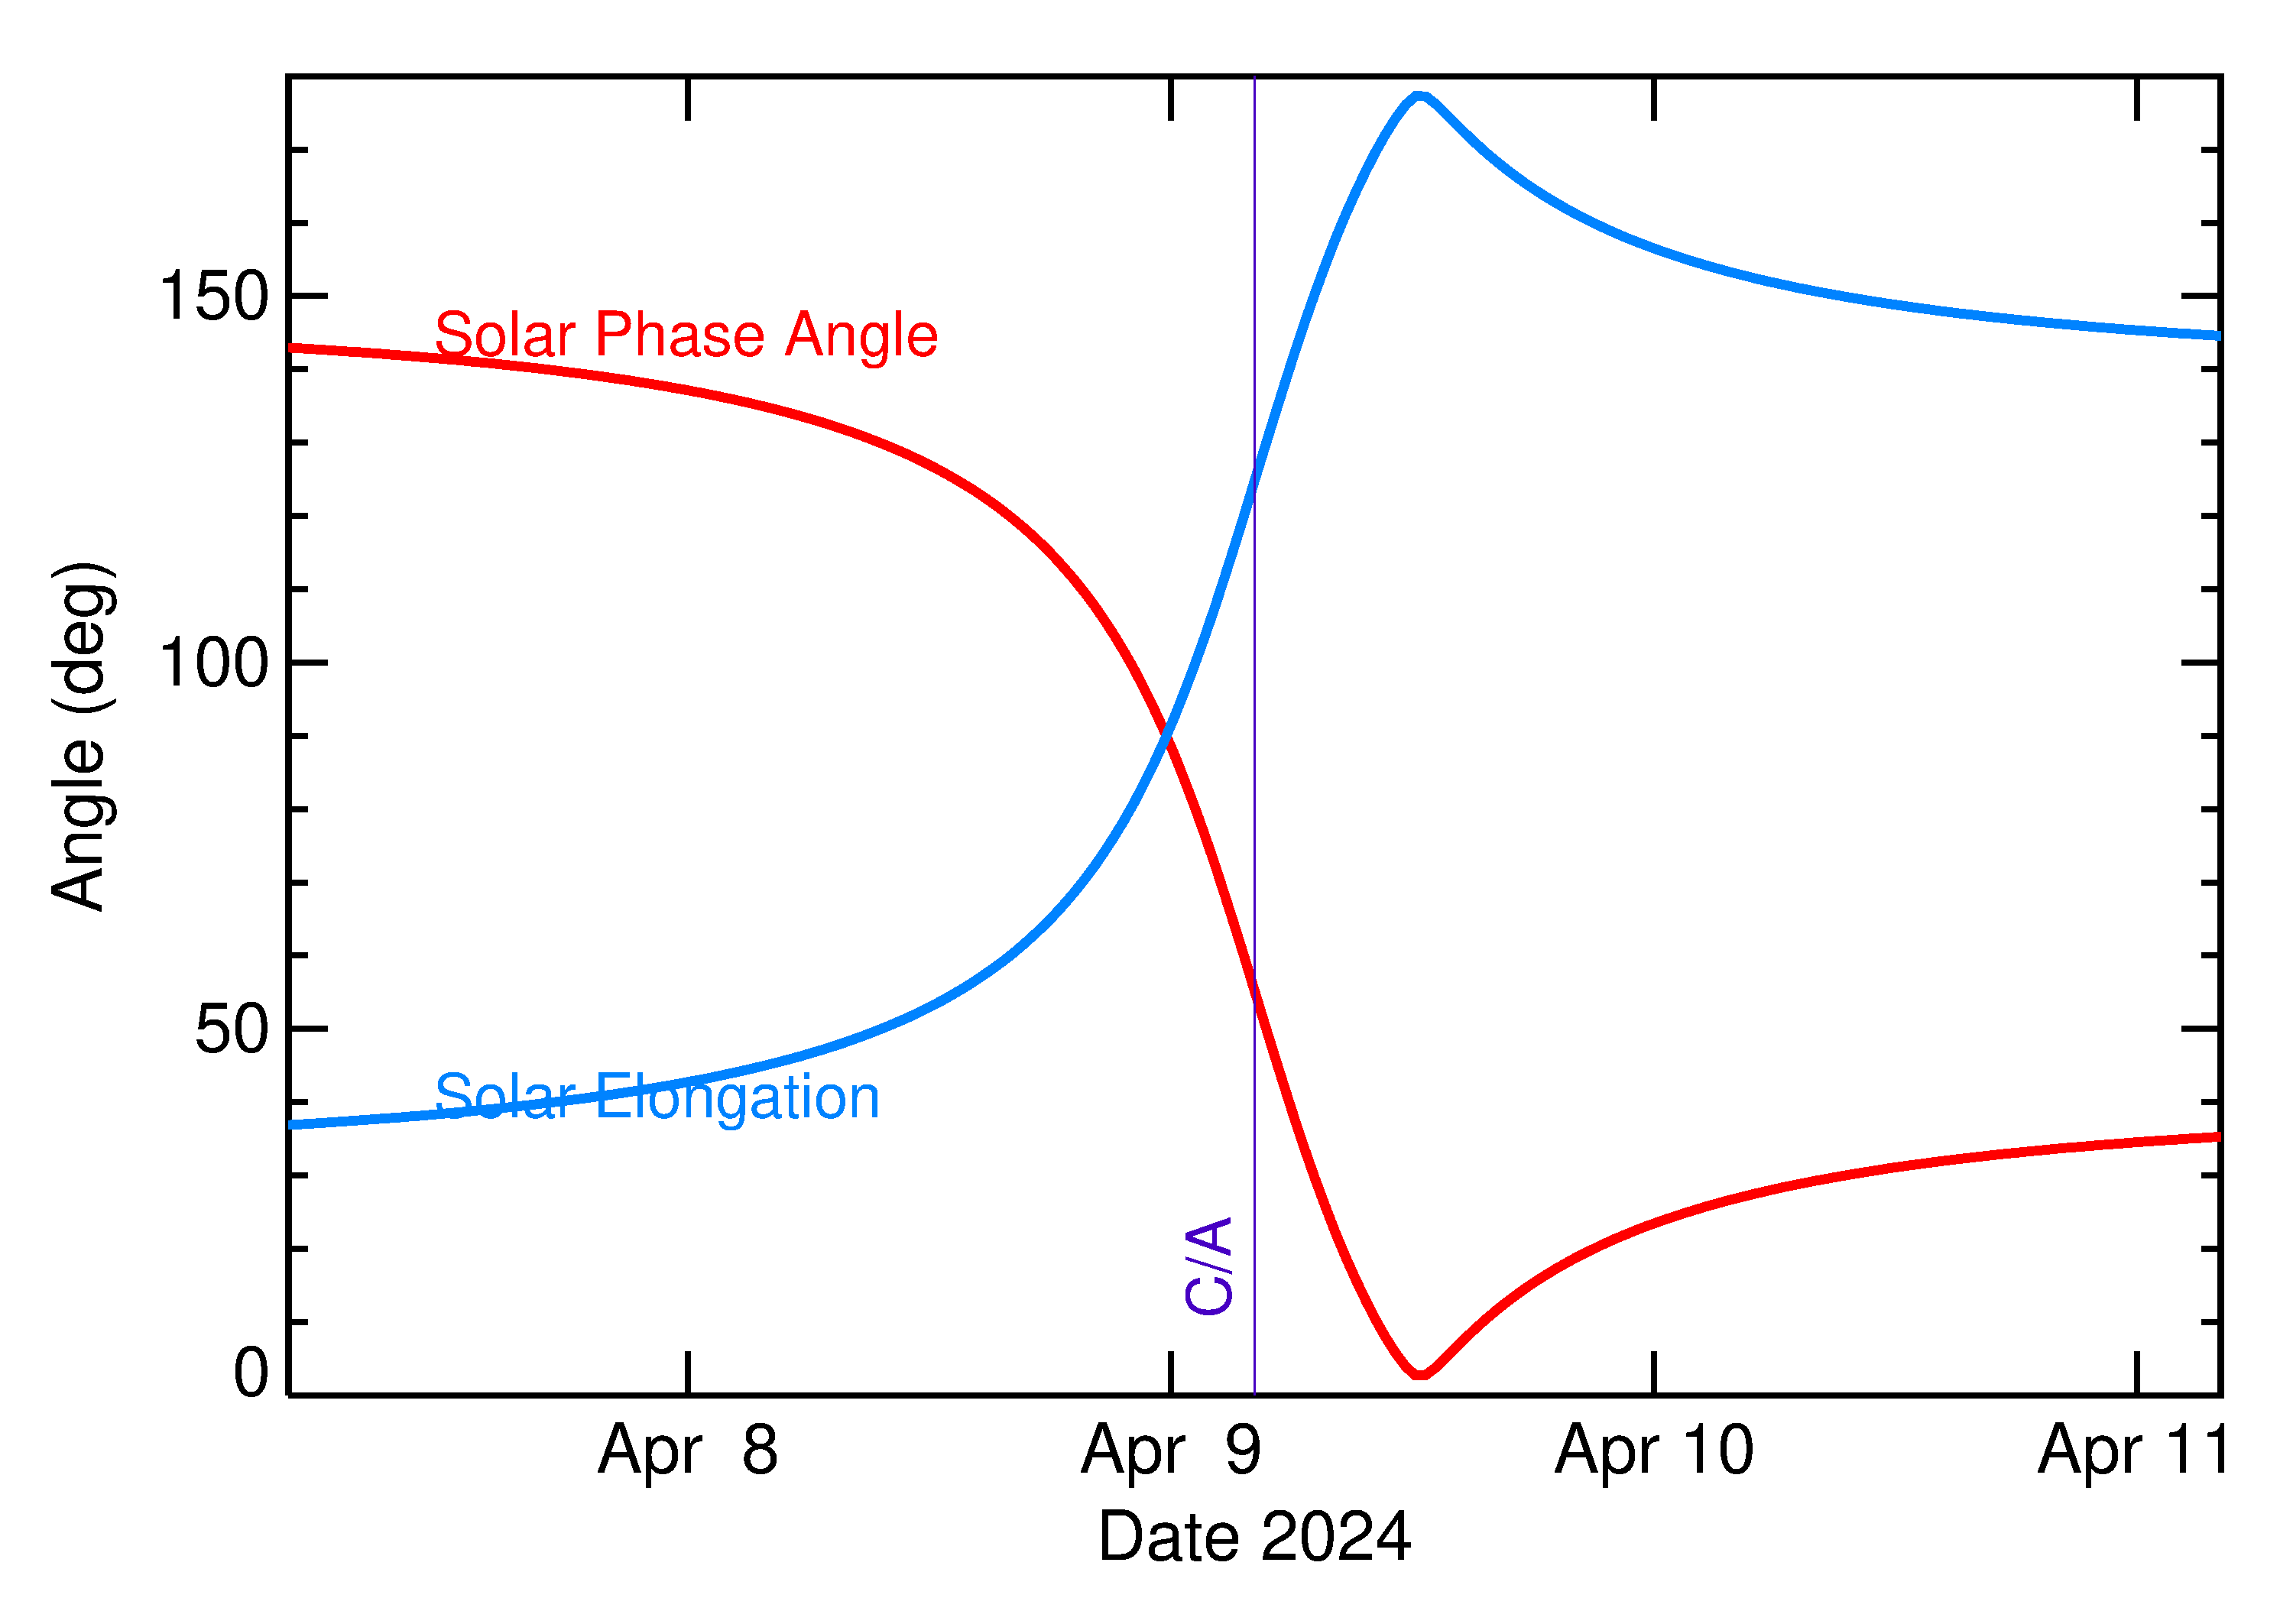 Solar Elongation and Solar Phase Angle of 2024 GV2 in the days around closest approach